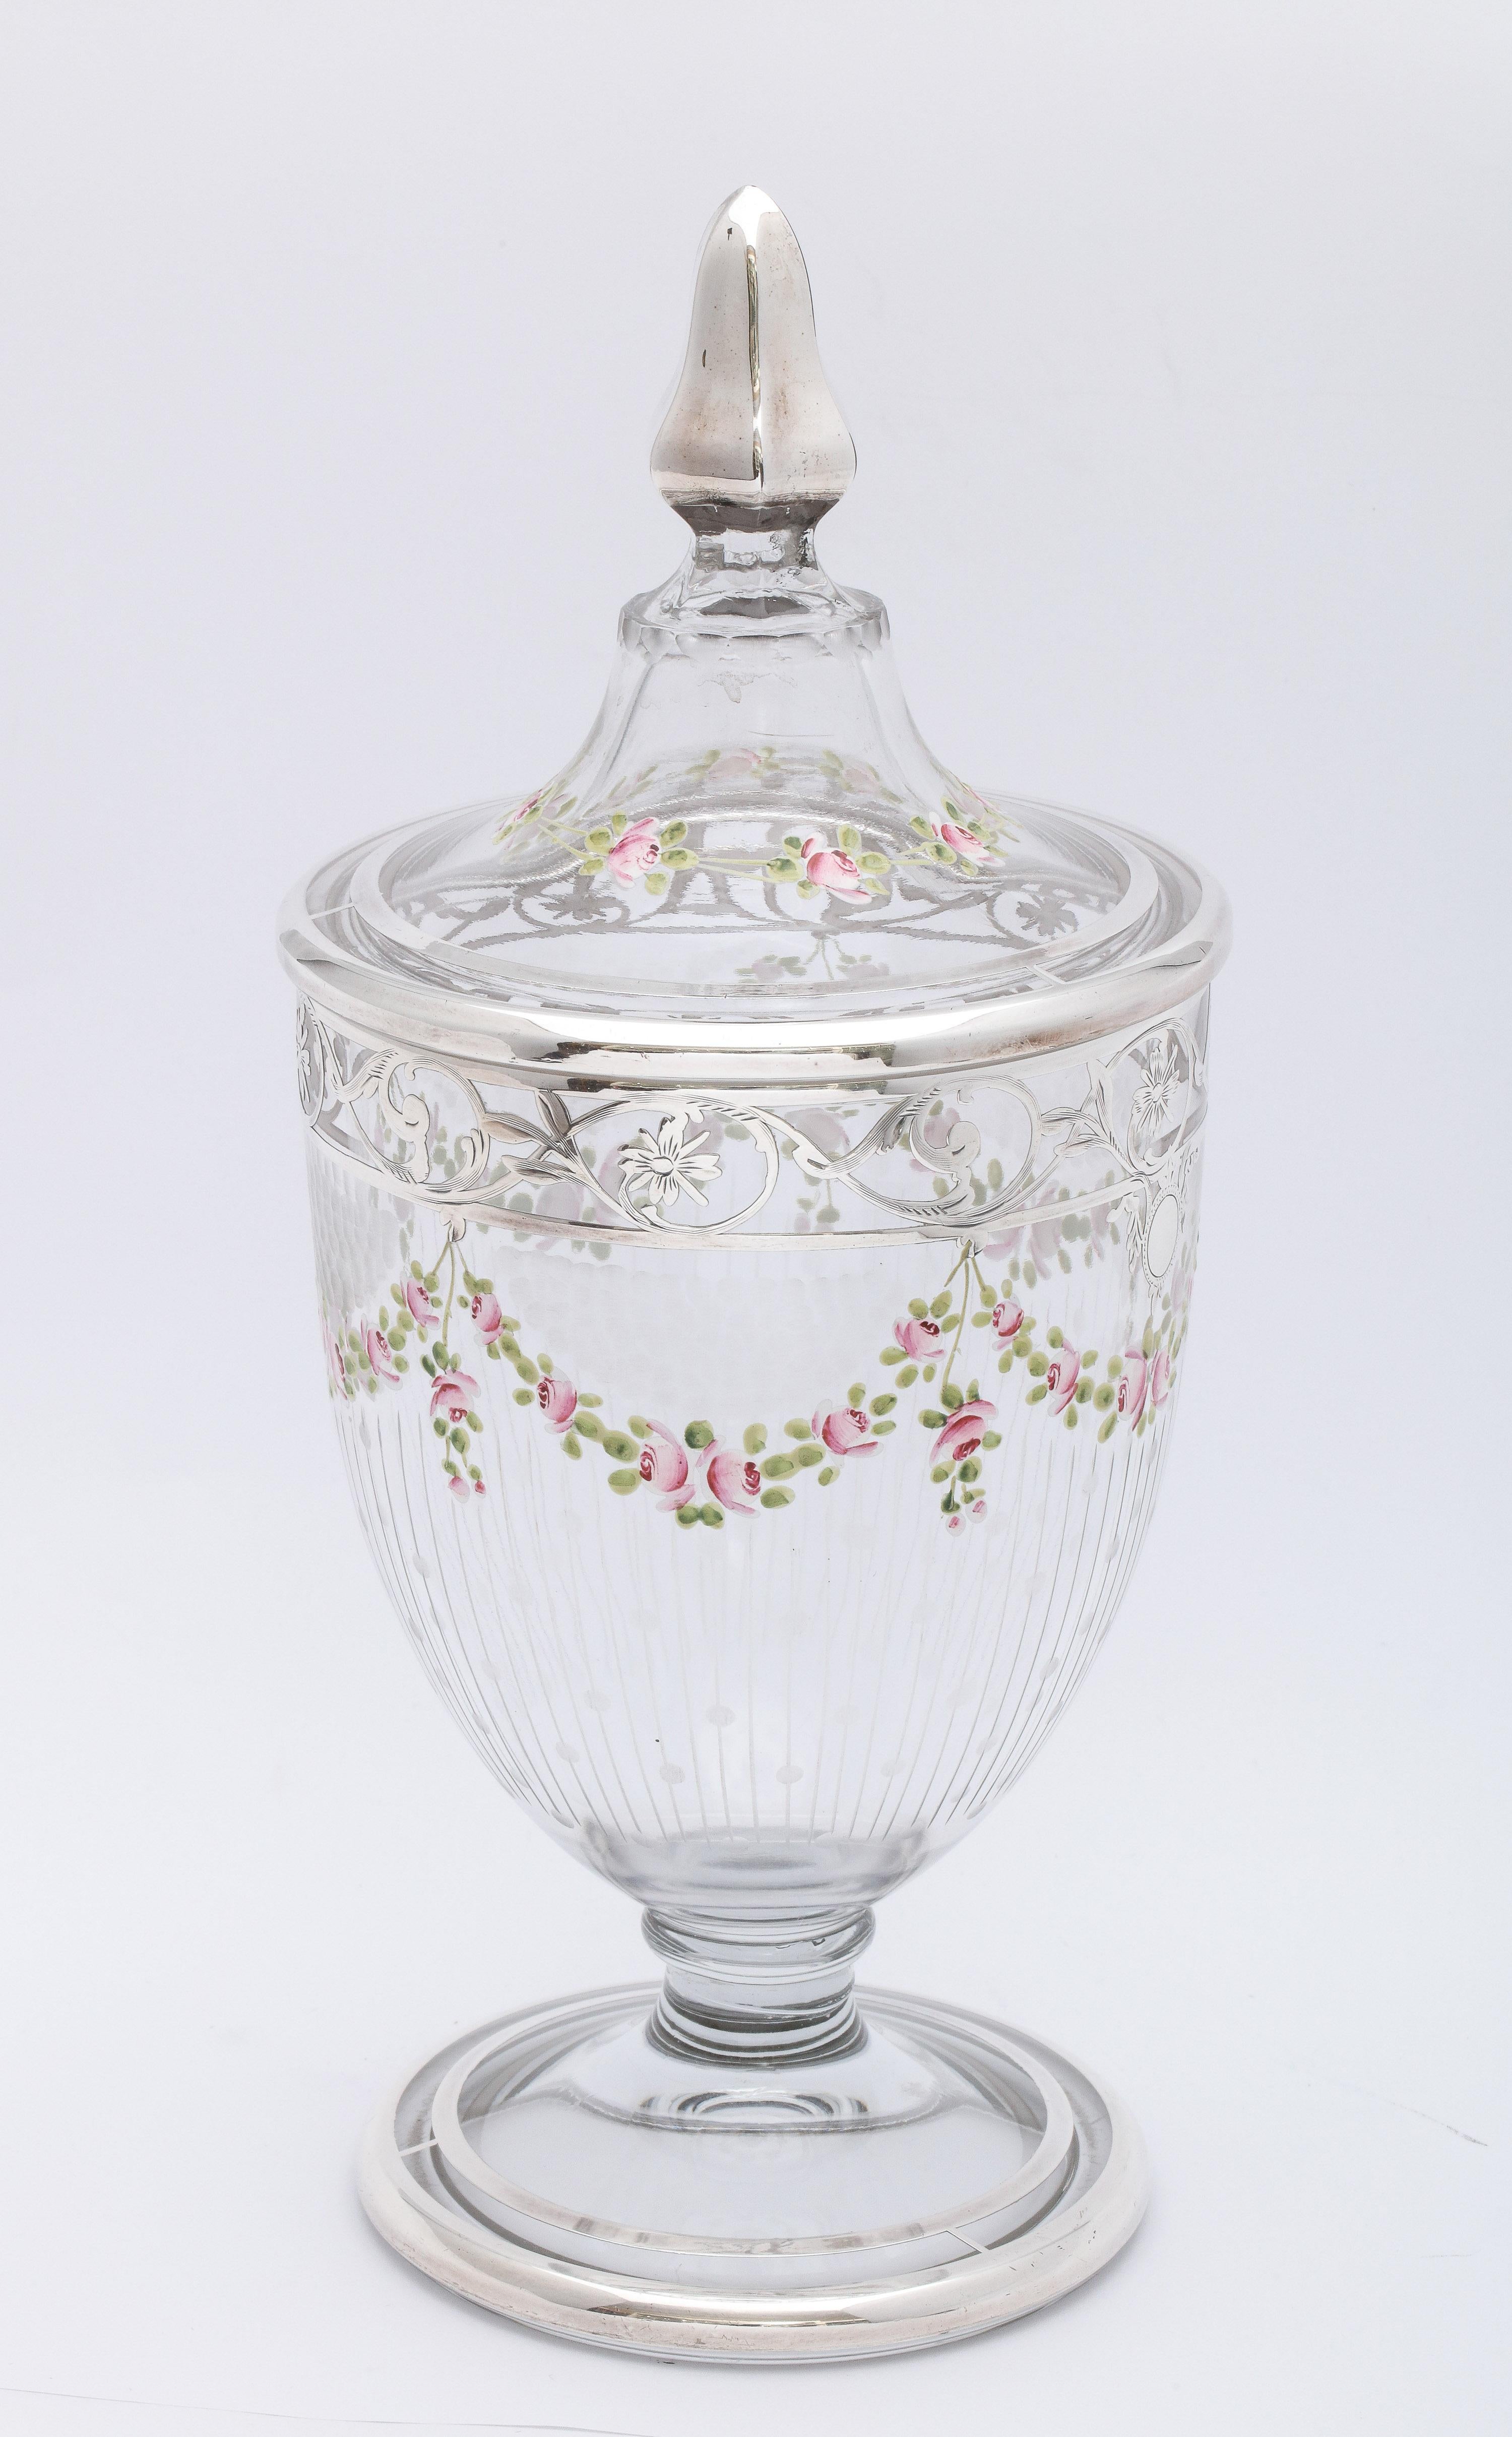 American Edwardian Period Sterling Silver-Overlay and Enamel Sweetmeats Jar For Sale